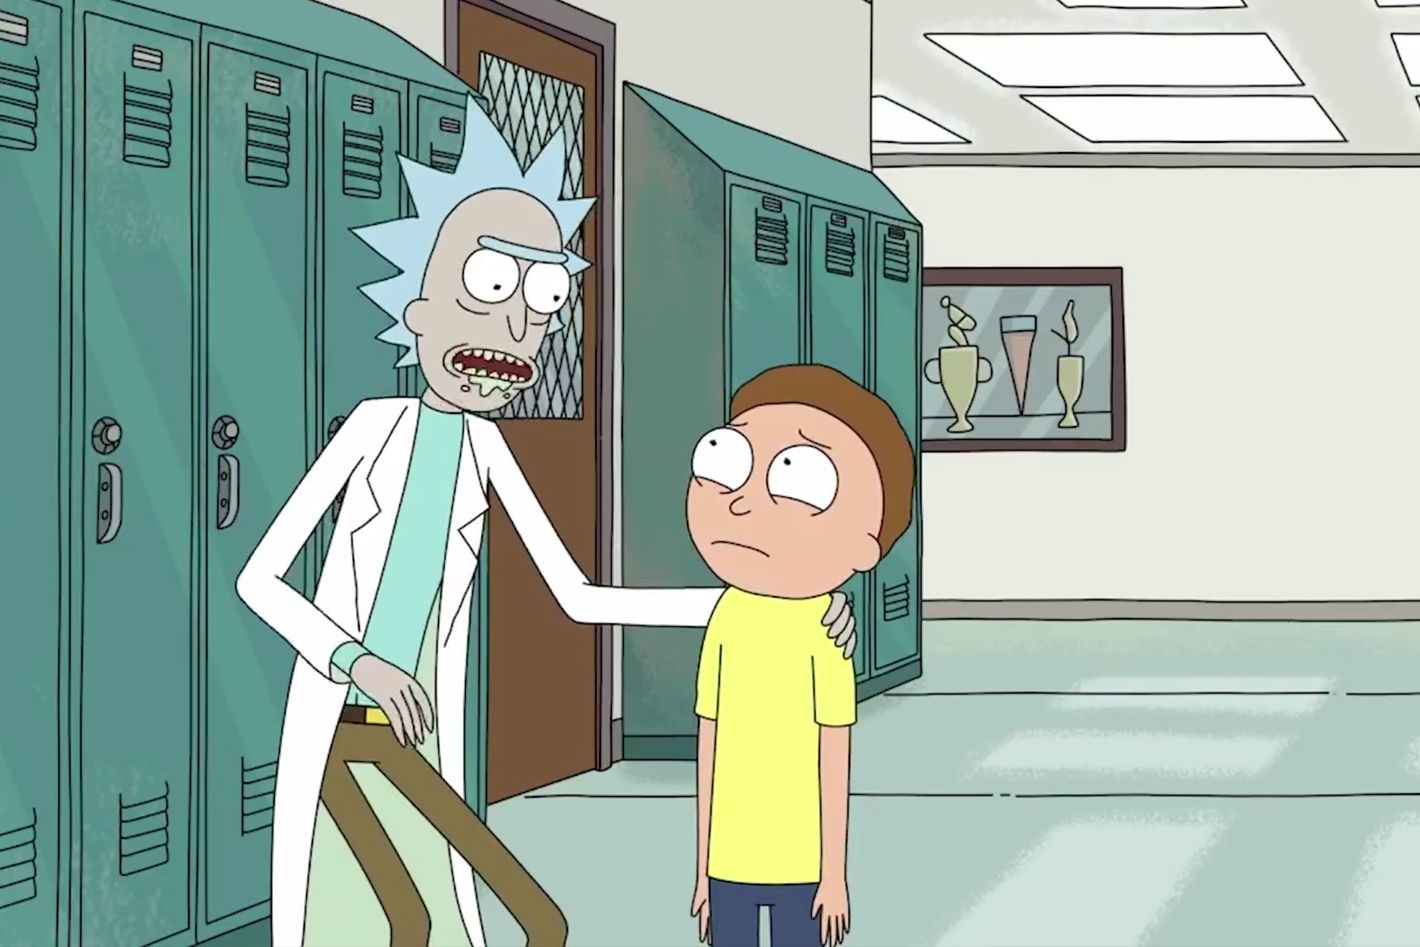 25-rick-and-morty-306.w710.h473.2x.jpg